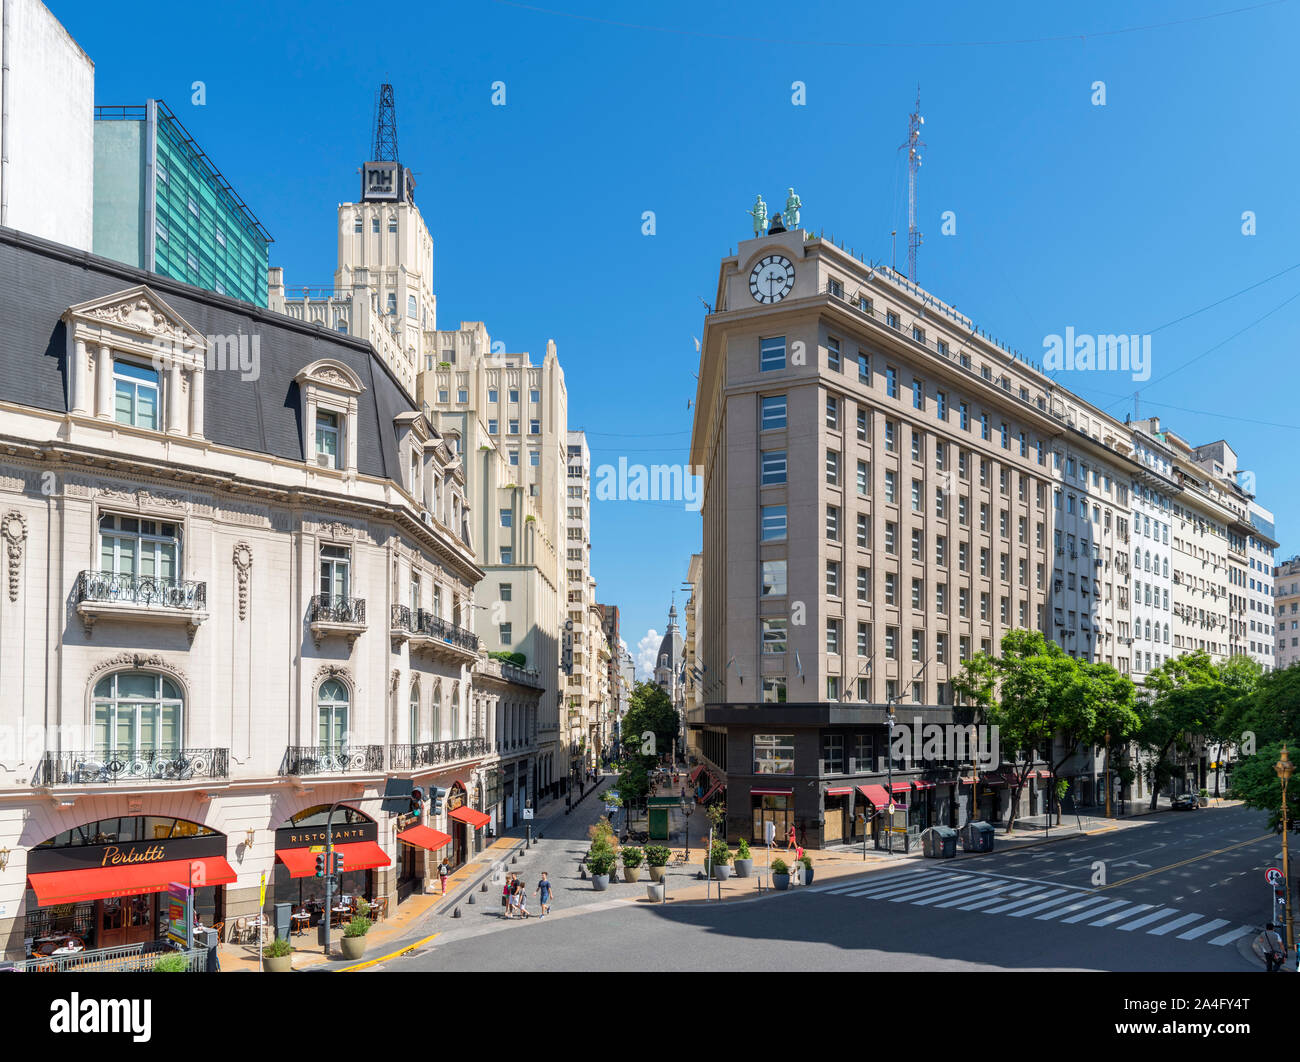 View from the Cabildo looking towards Av. Pres. Julio A. Roca and Calle Bolivar, Plaza de Mayo, Buenos Aires, Argentina Stock Photo